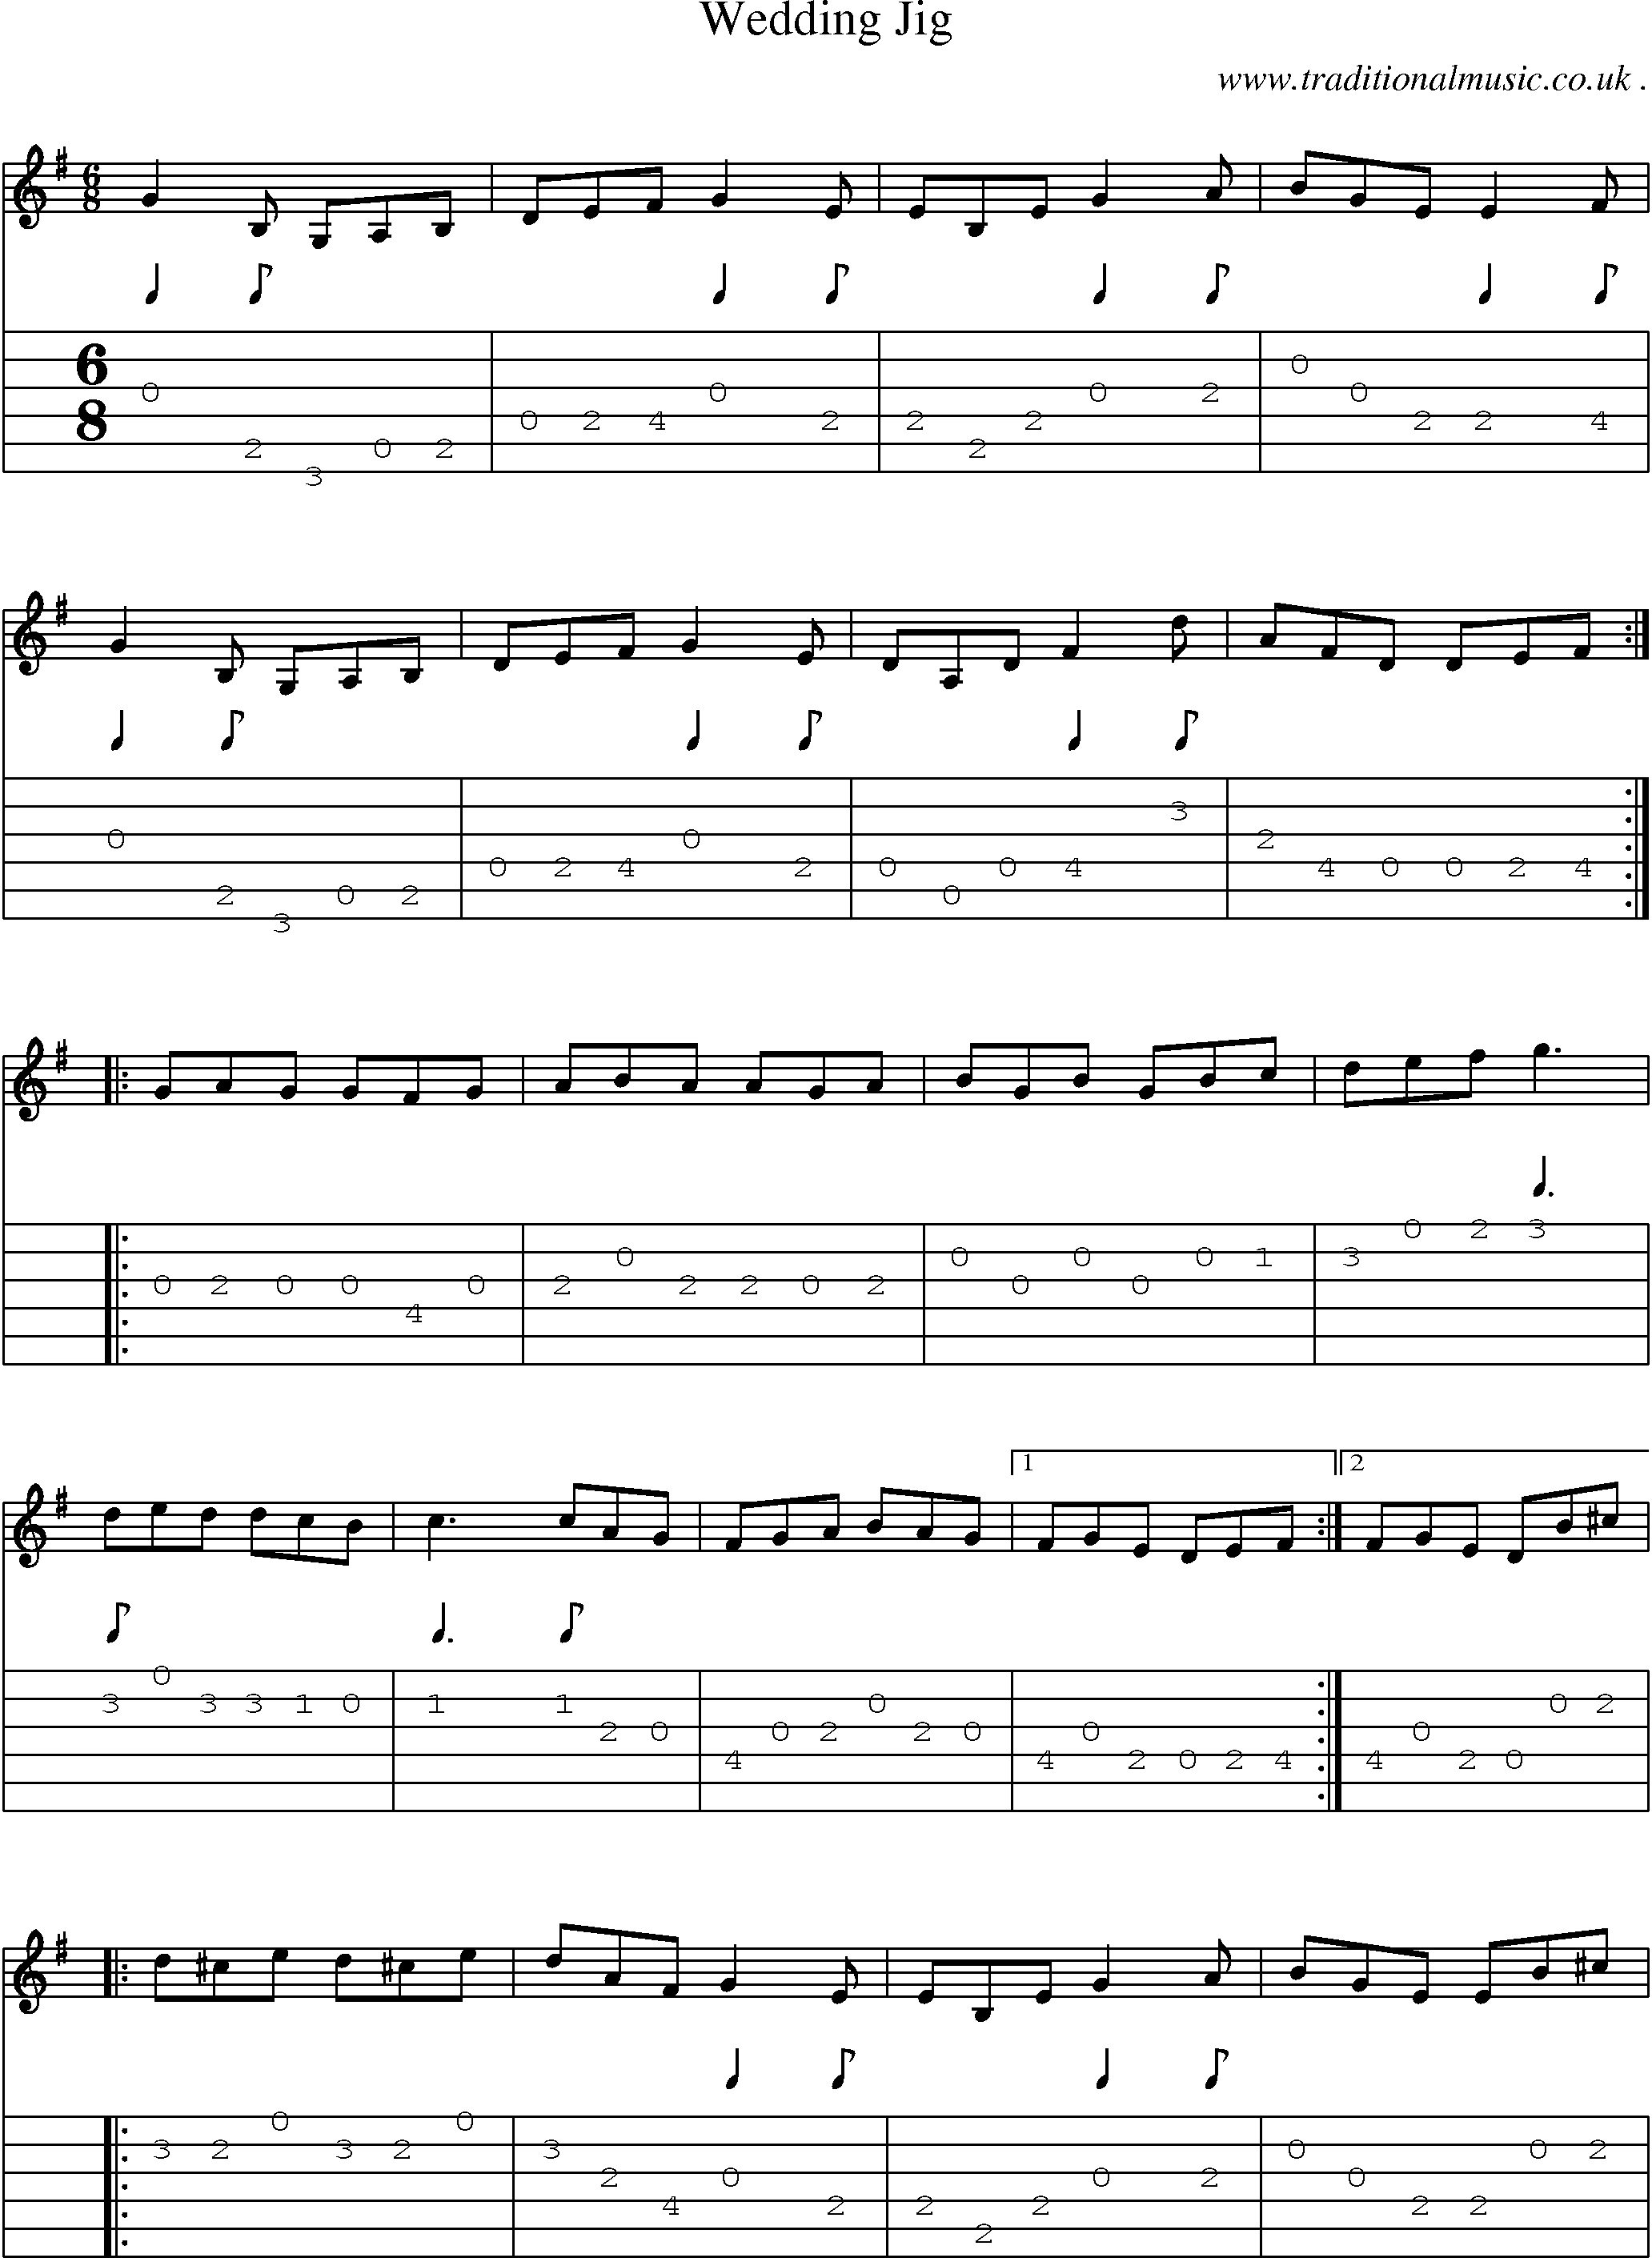 Sheet-Music and Guitar Tabs for Wedding Jig